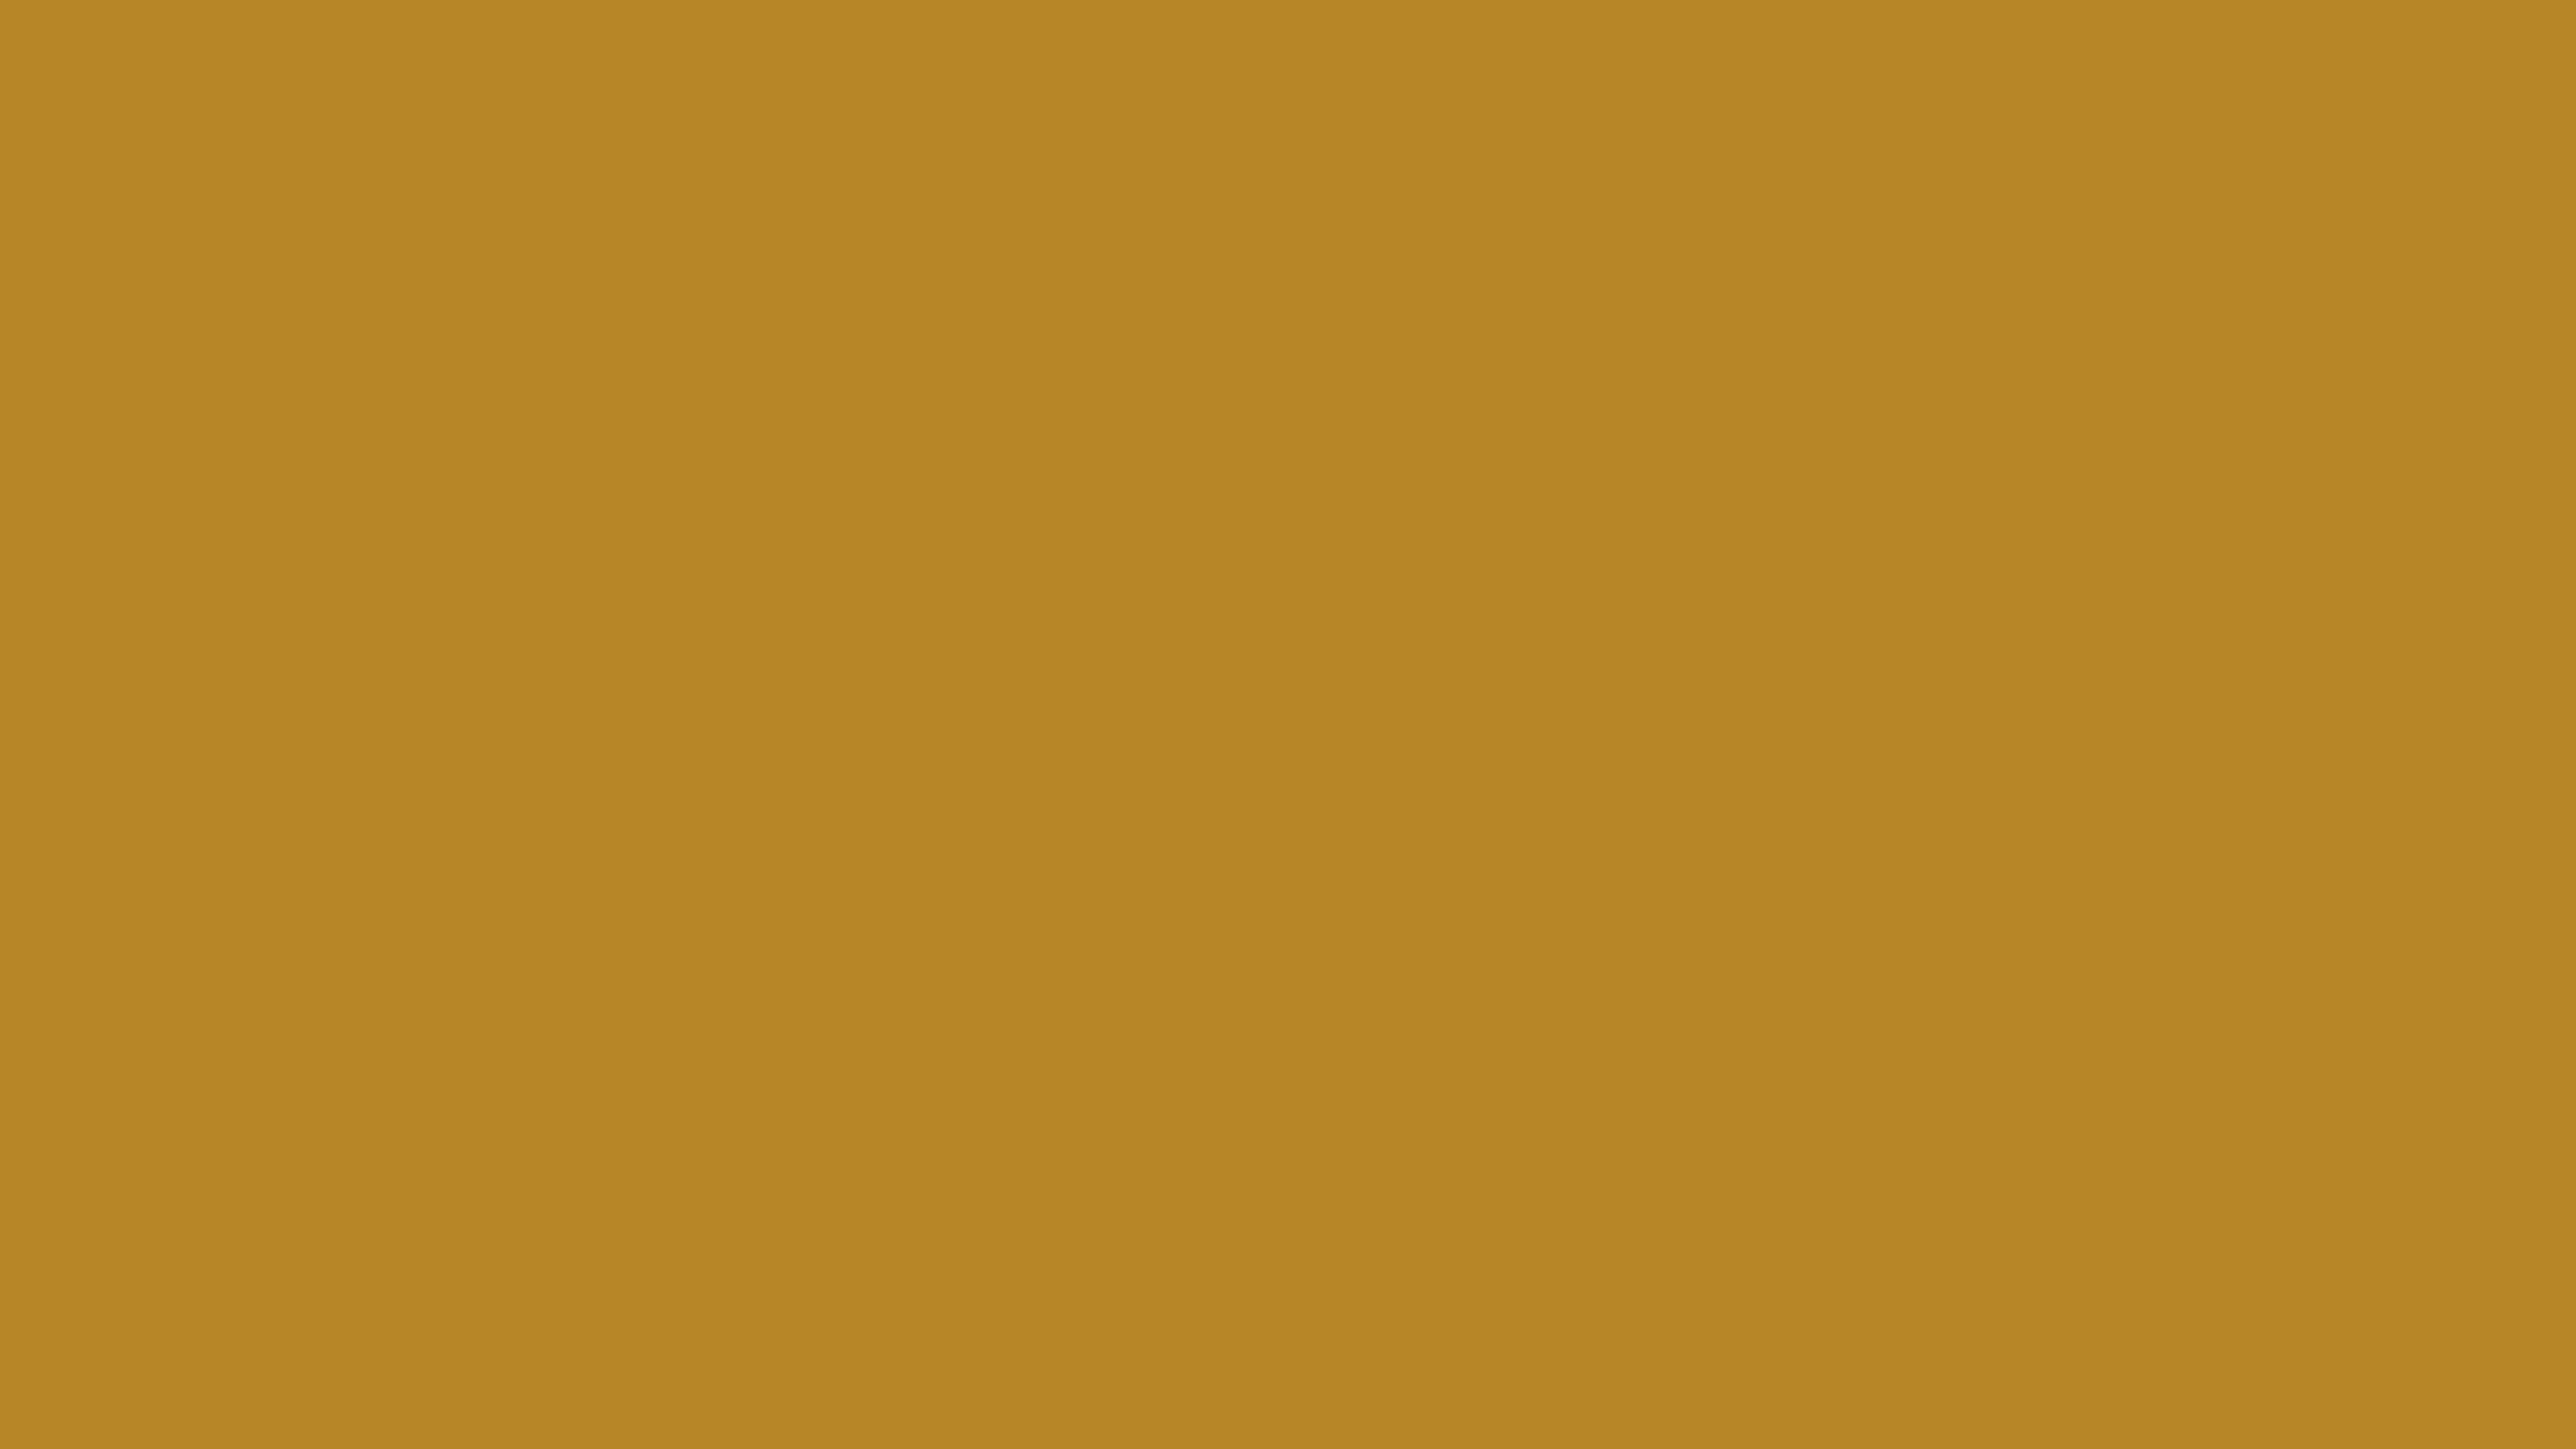 7680x4320 University Of California Gold Solid Color Background